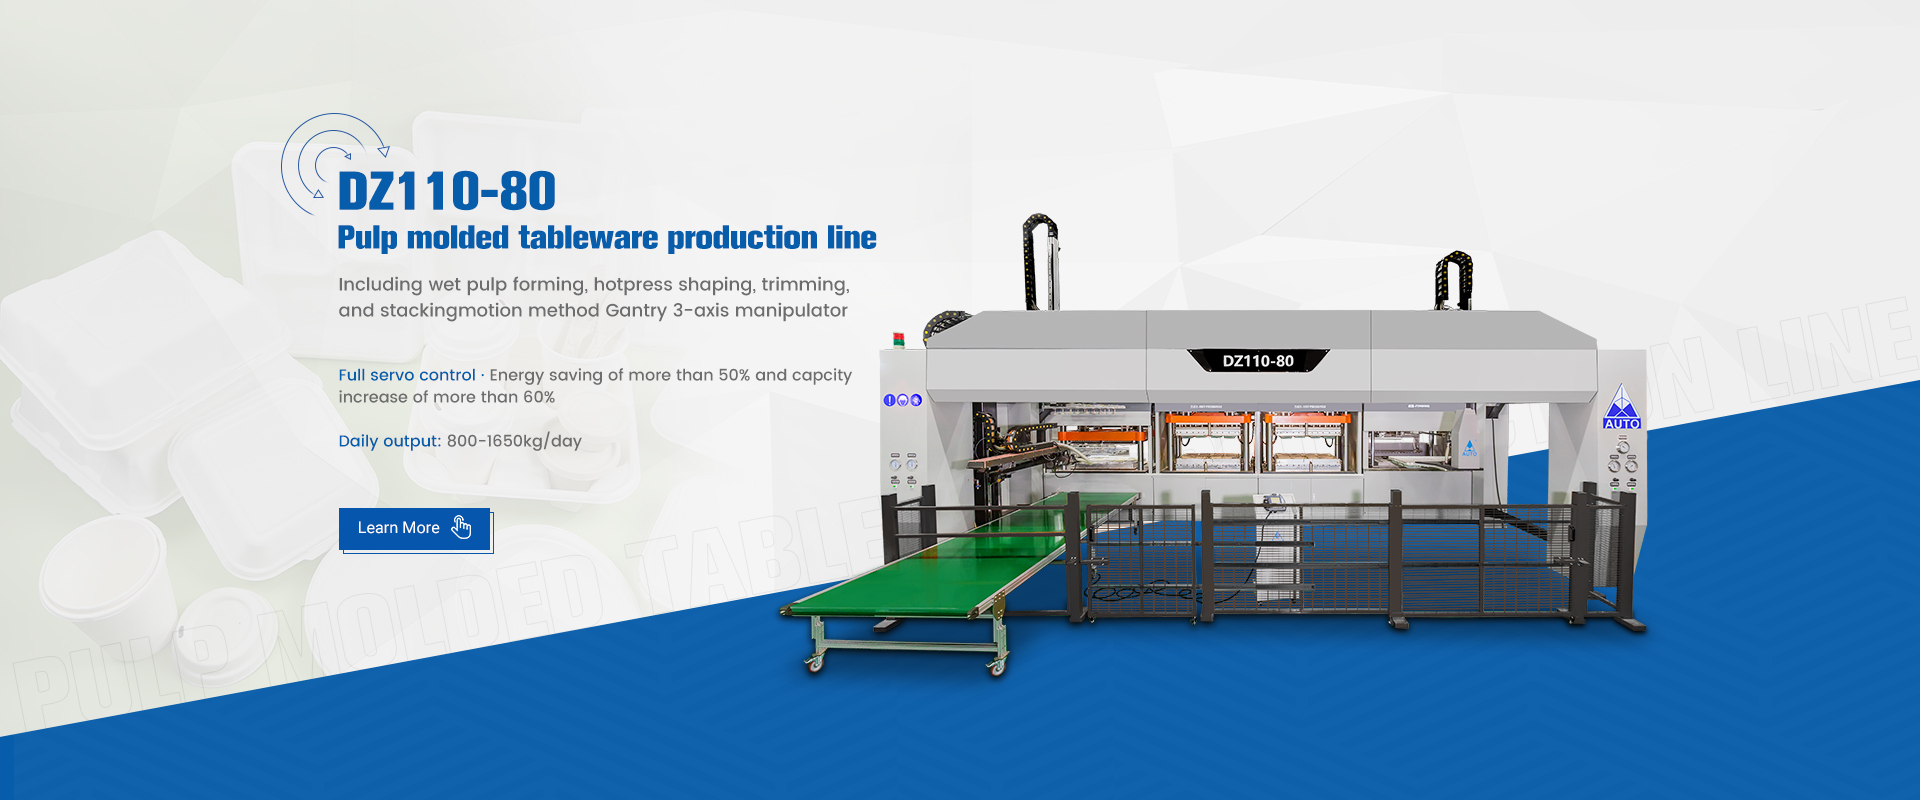 DZ110-80 pulp molded tableware production line